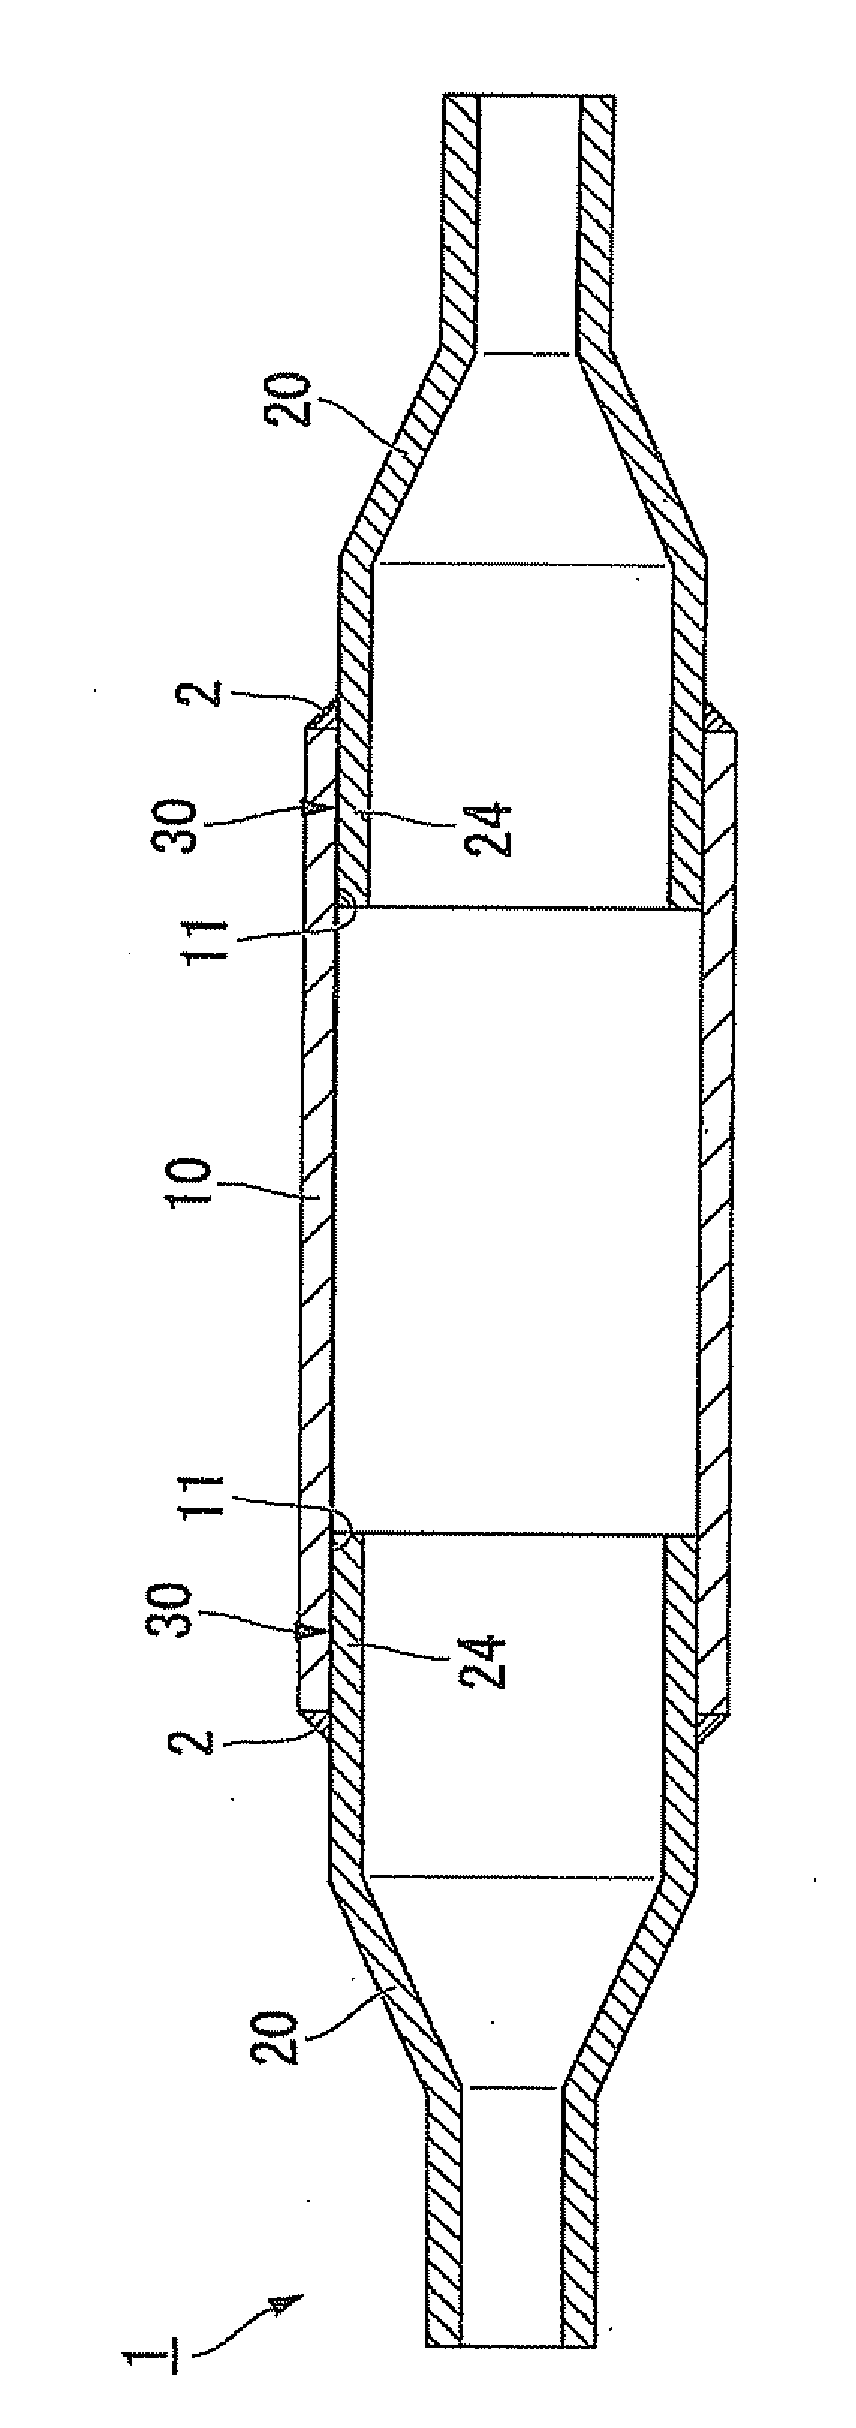 Roller for in-furnace conveyance